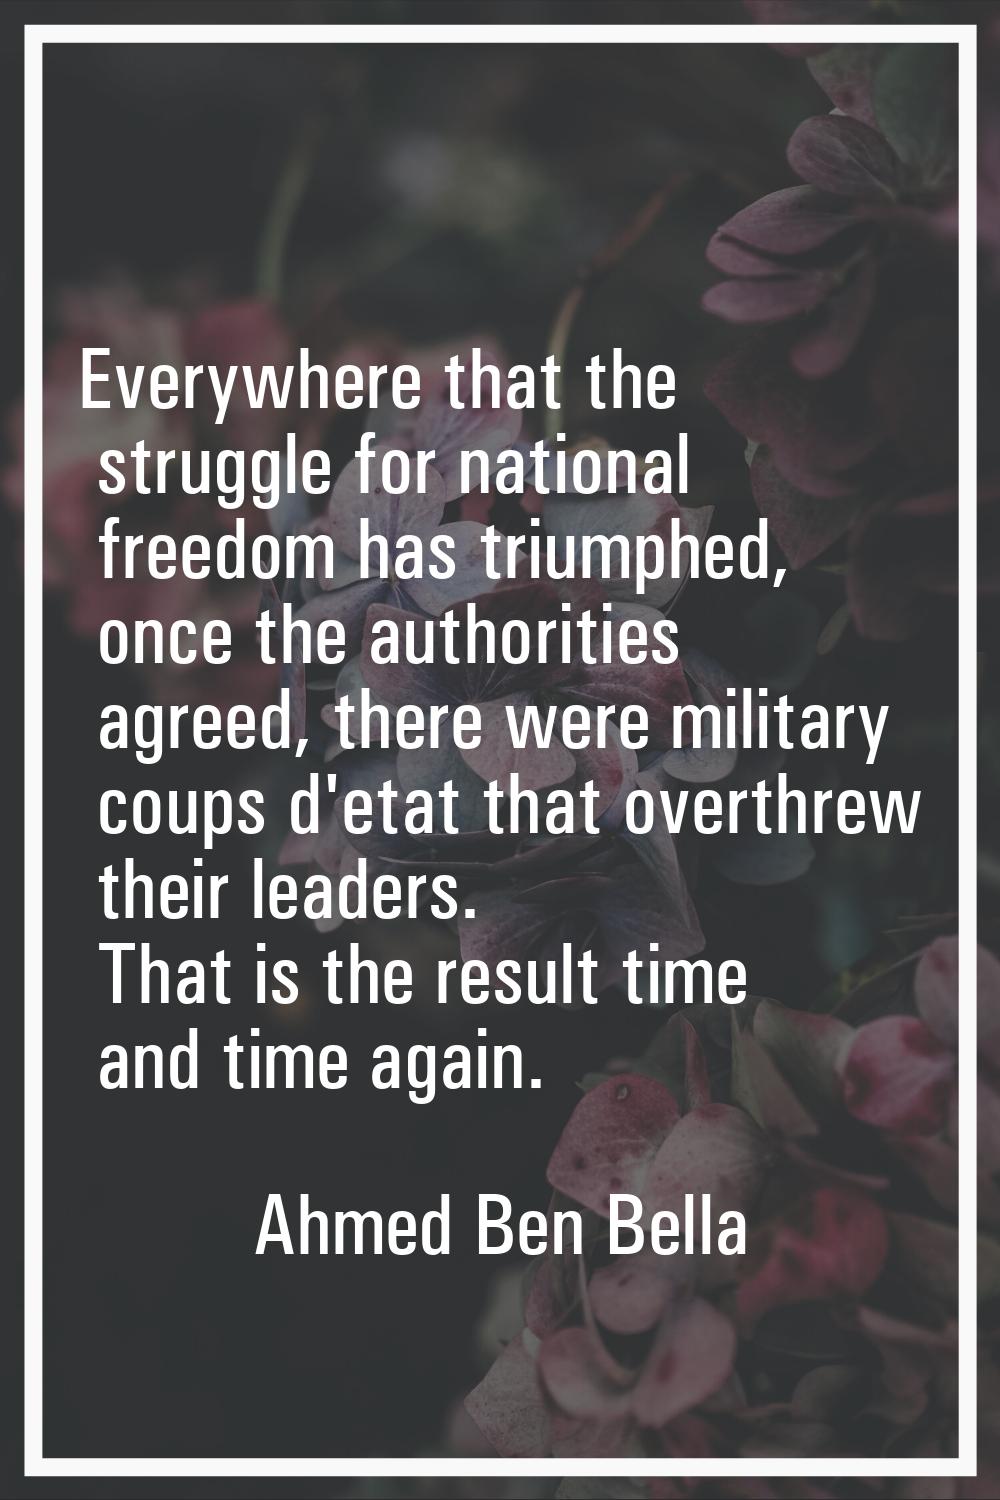 Everywhere that the struggle for national freedom has triumphed, once the authorities agreed, there